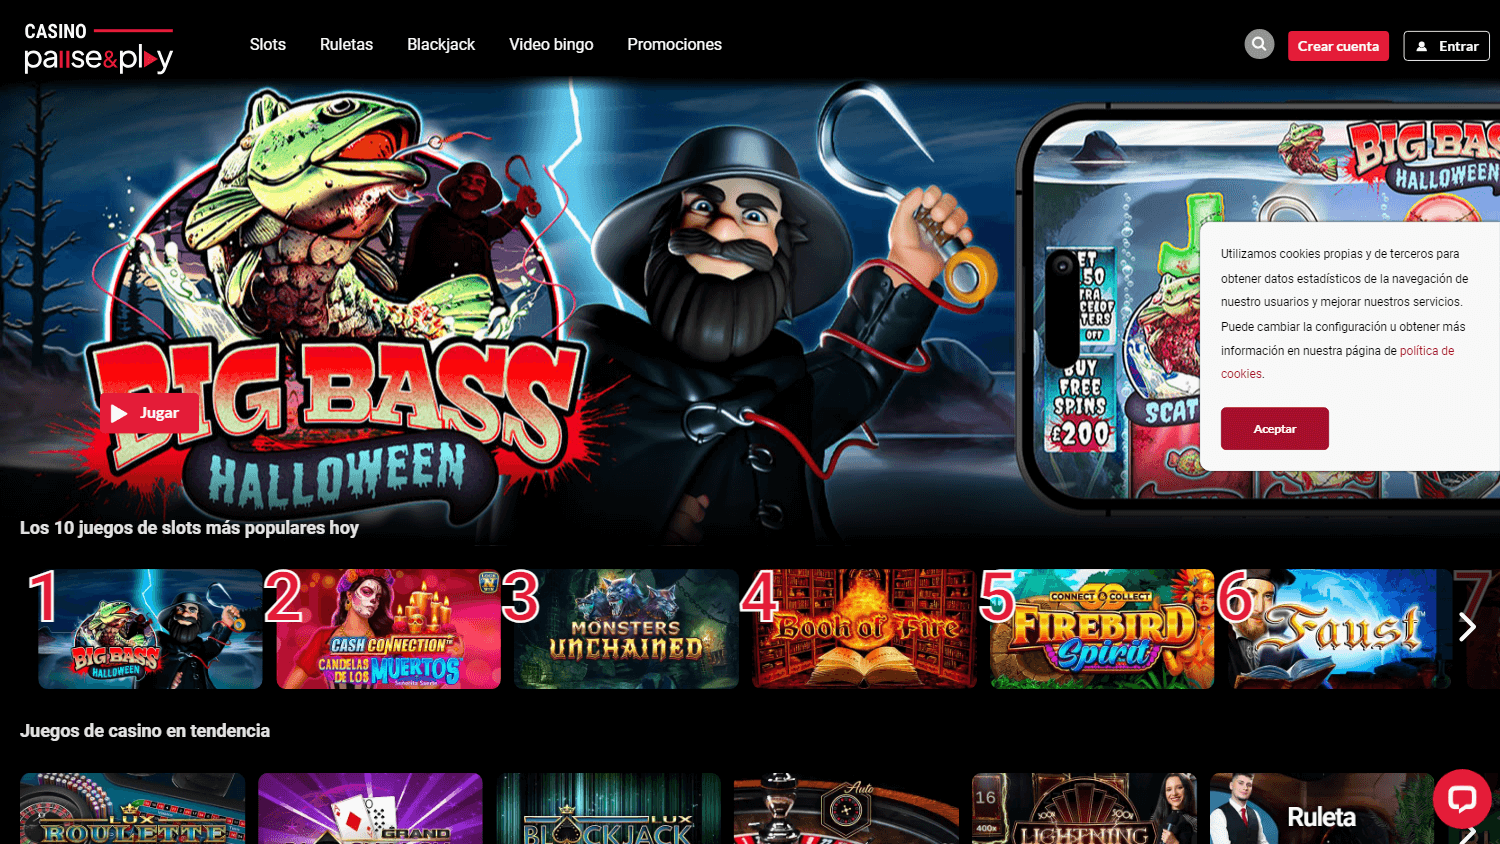 pause_and_play_casino_homepage_desktop